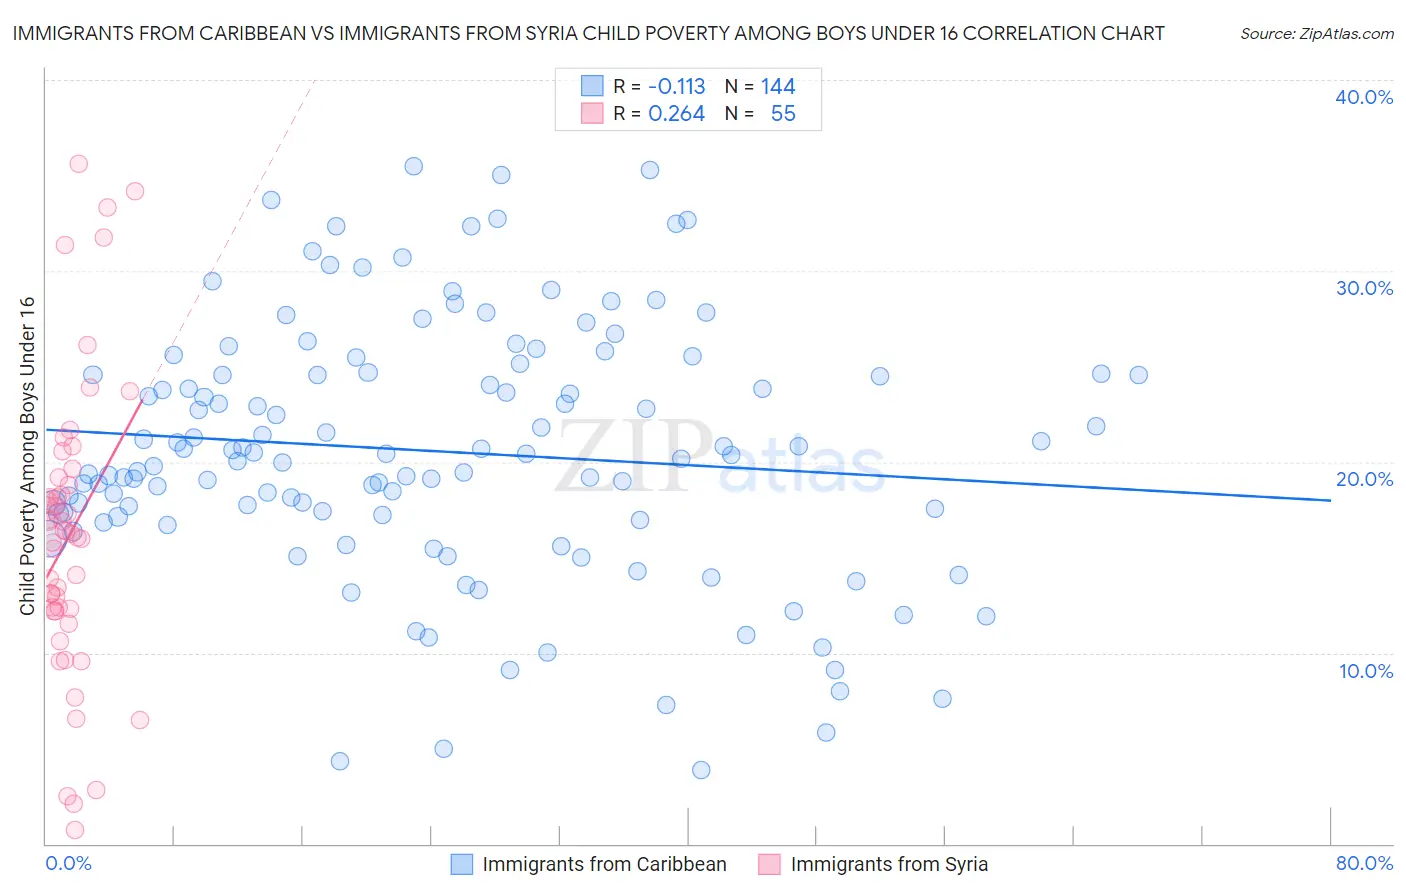 Immigrants from Caribbean vs Immigrants from Syria Child Poverty Among Boys Under 16